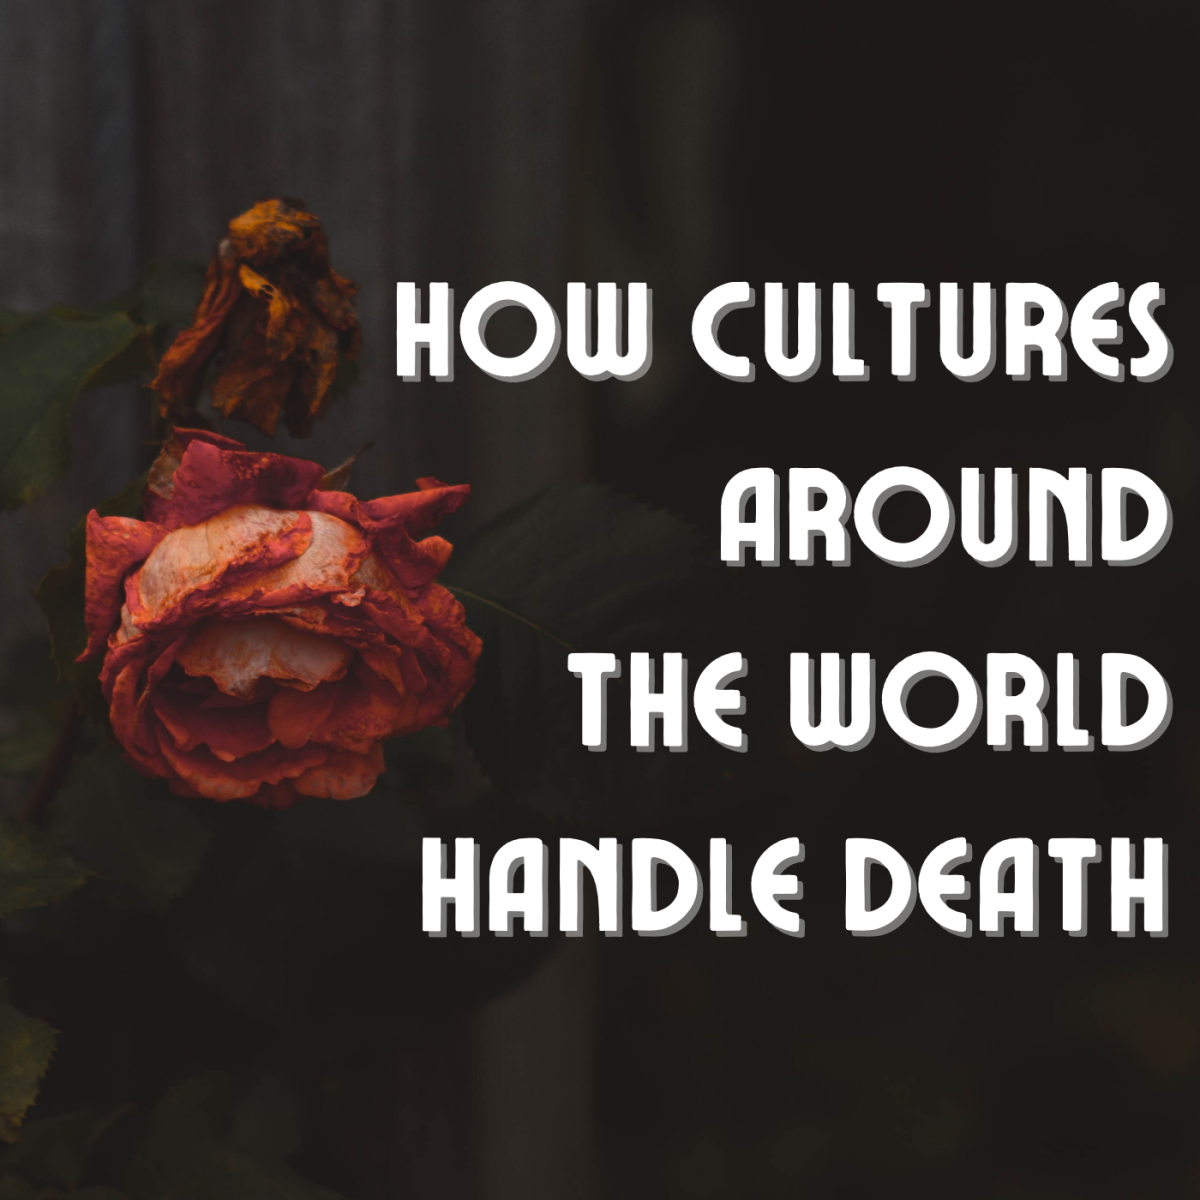 Death can be a celebration of life, or a means to help the soul pass—how do different cultures deal with death?